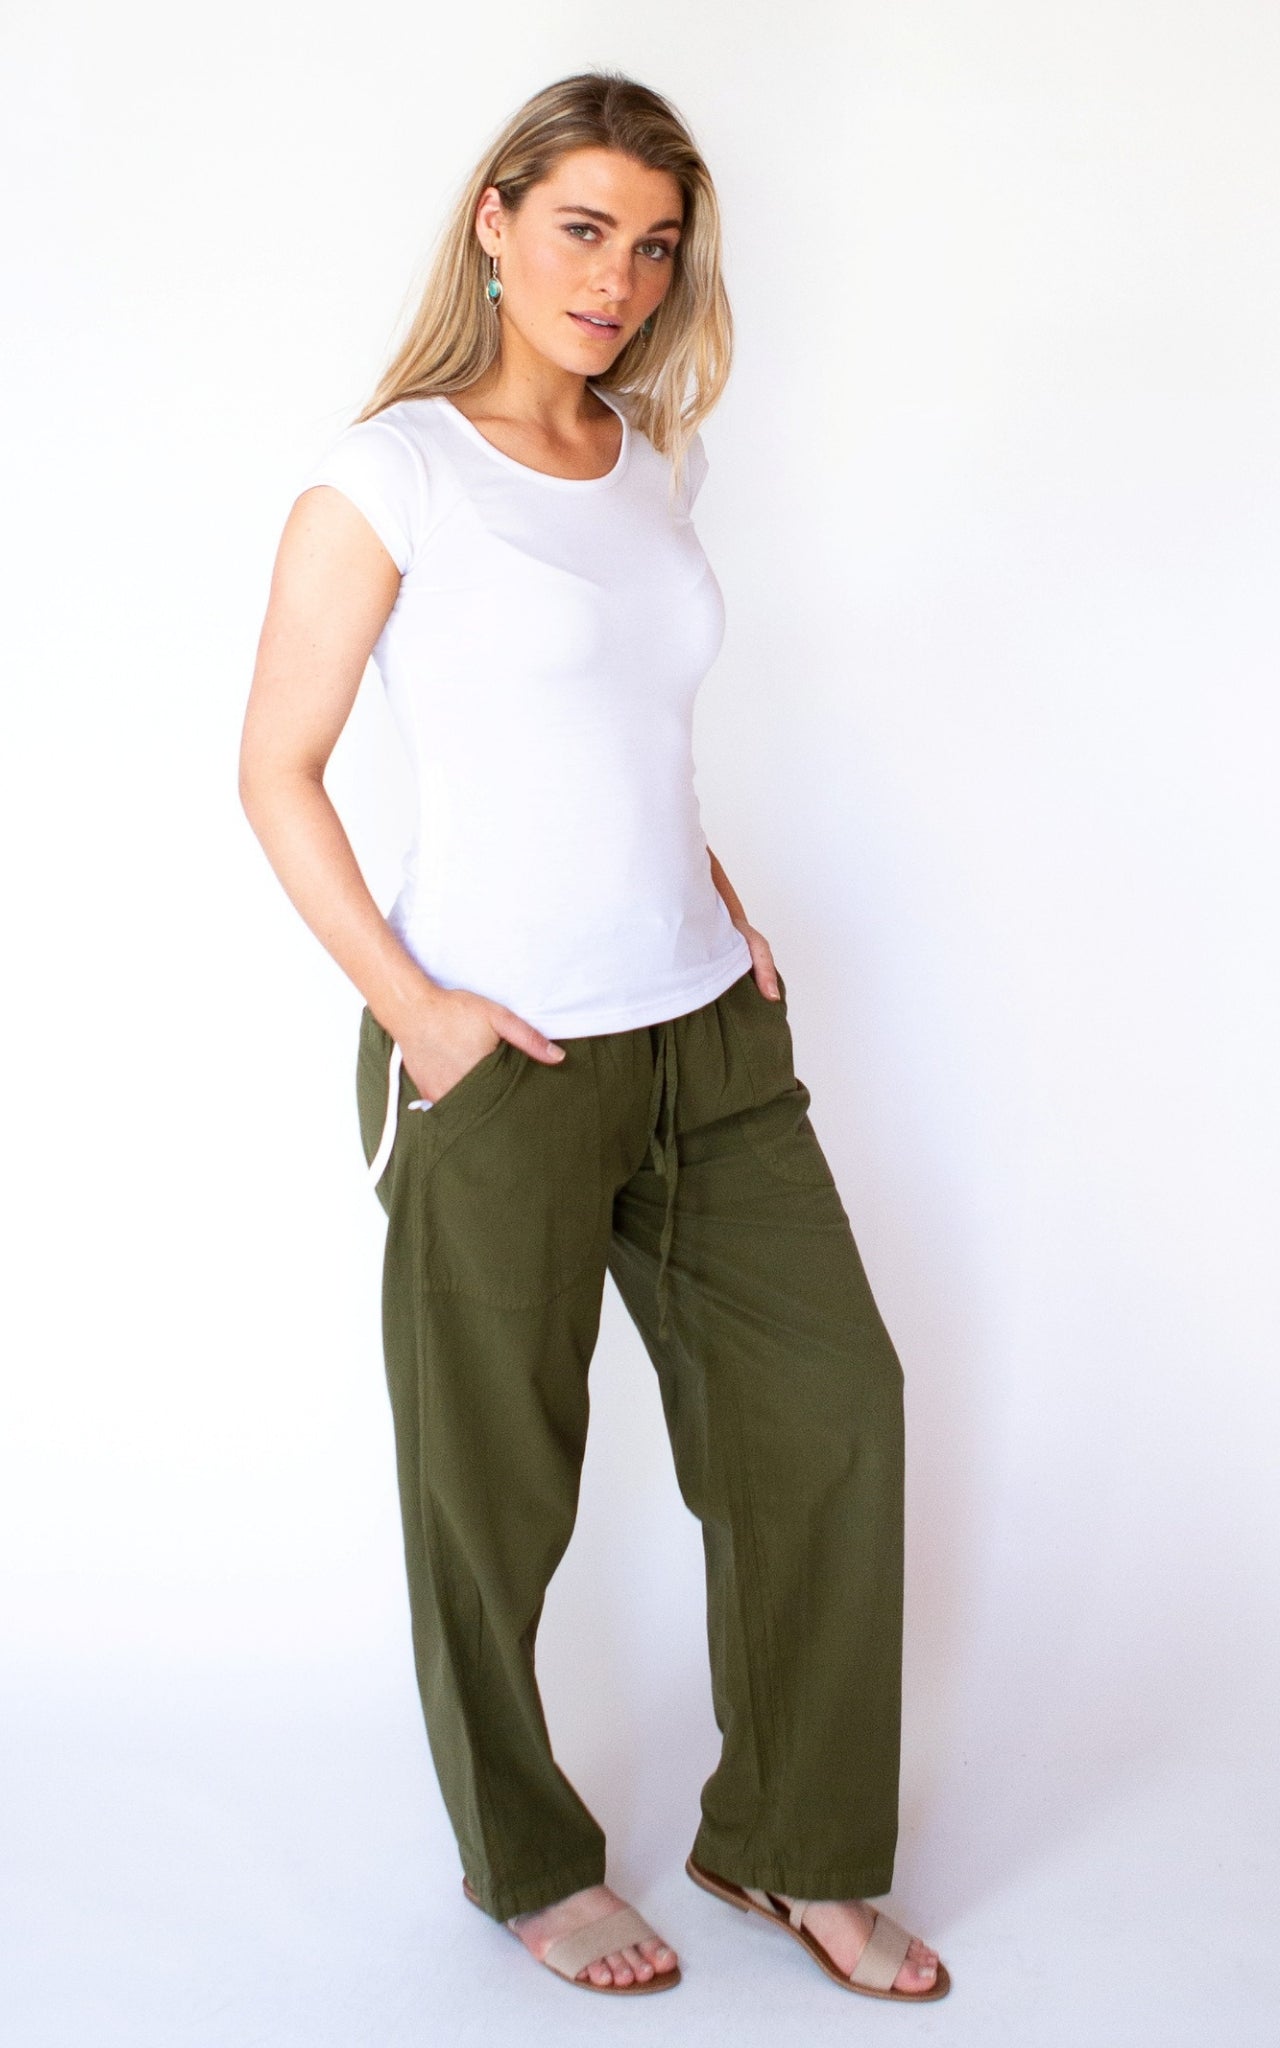 Surya Australia Ethical Cotton Loose Pants from Nepal